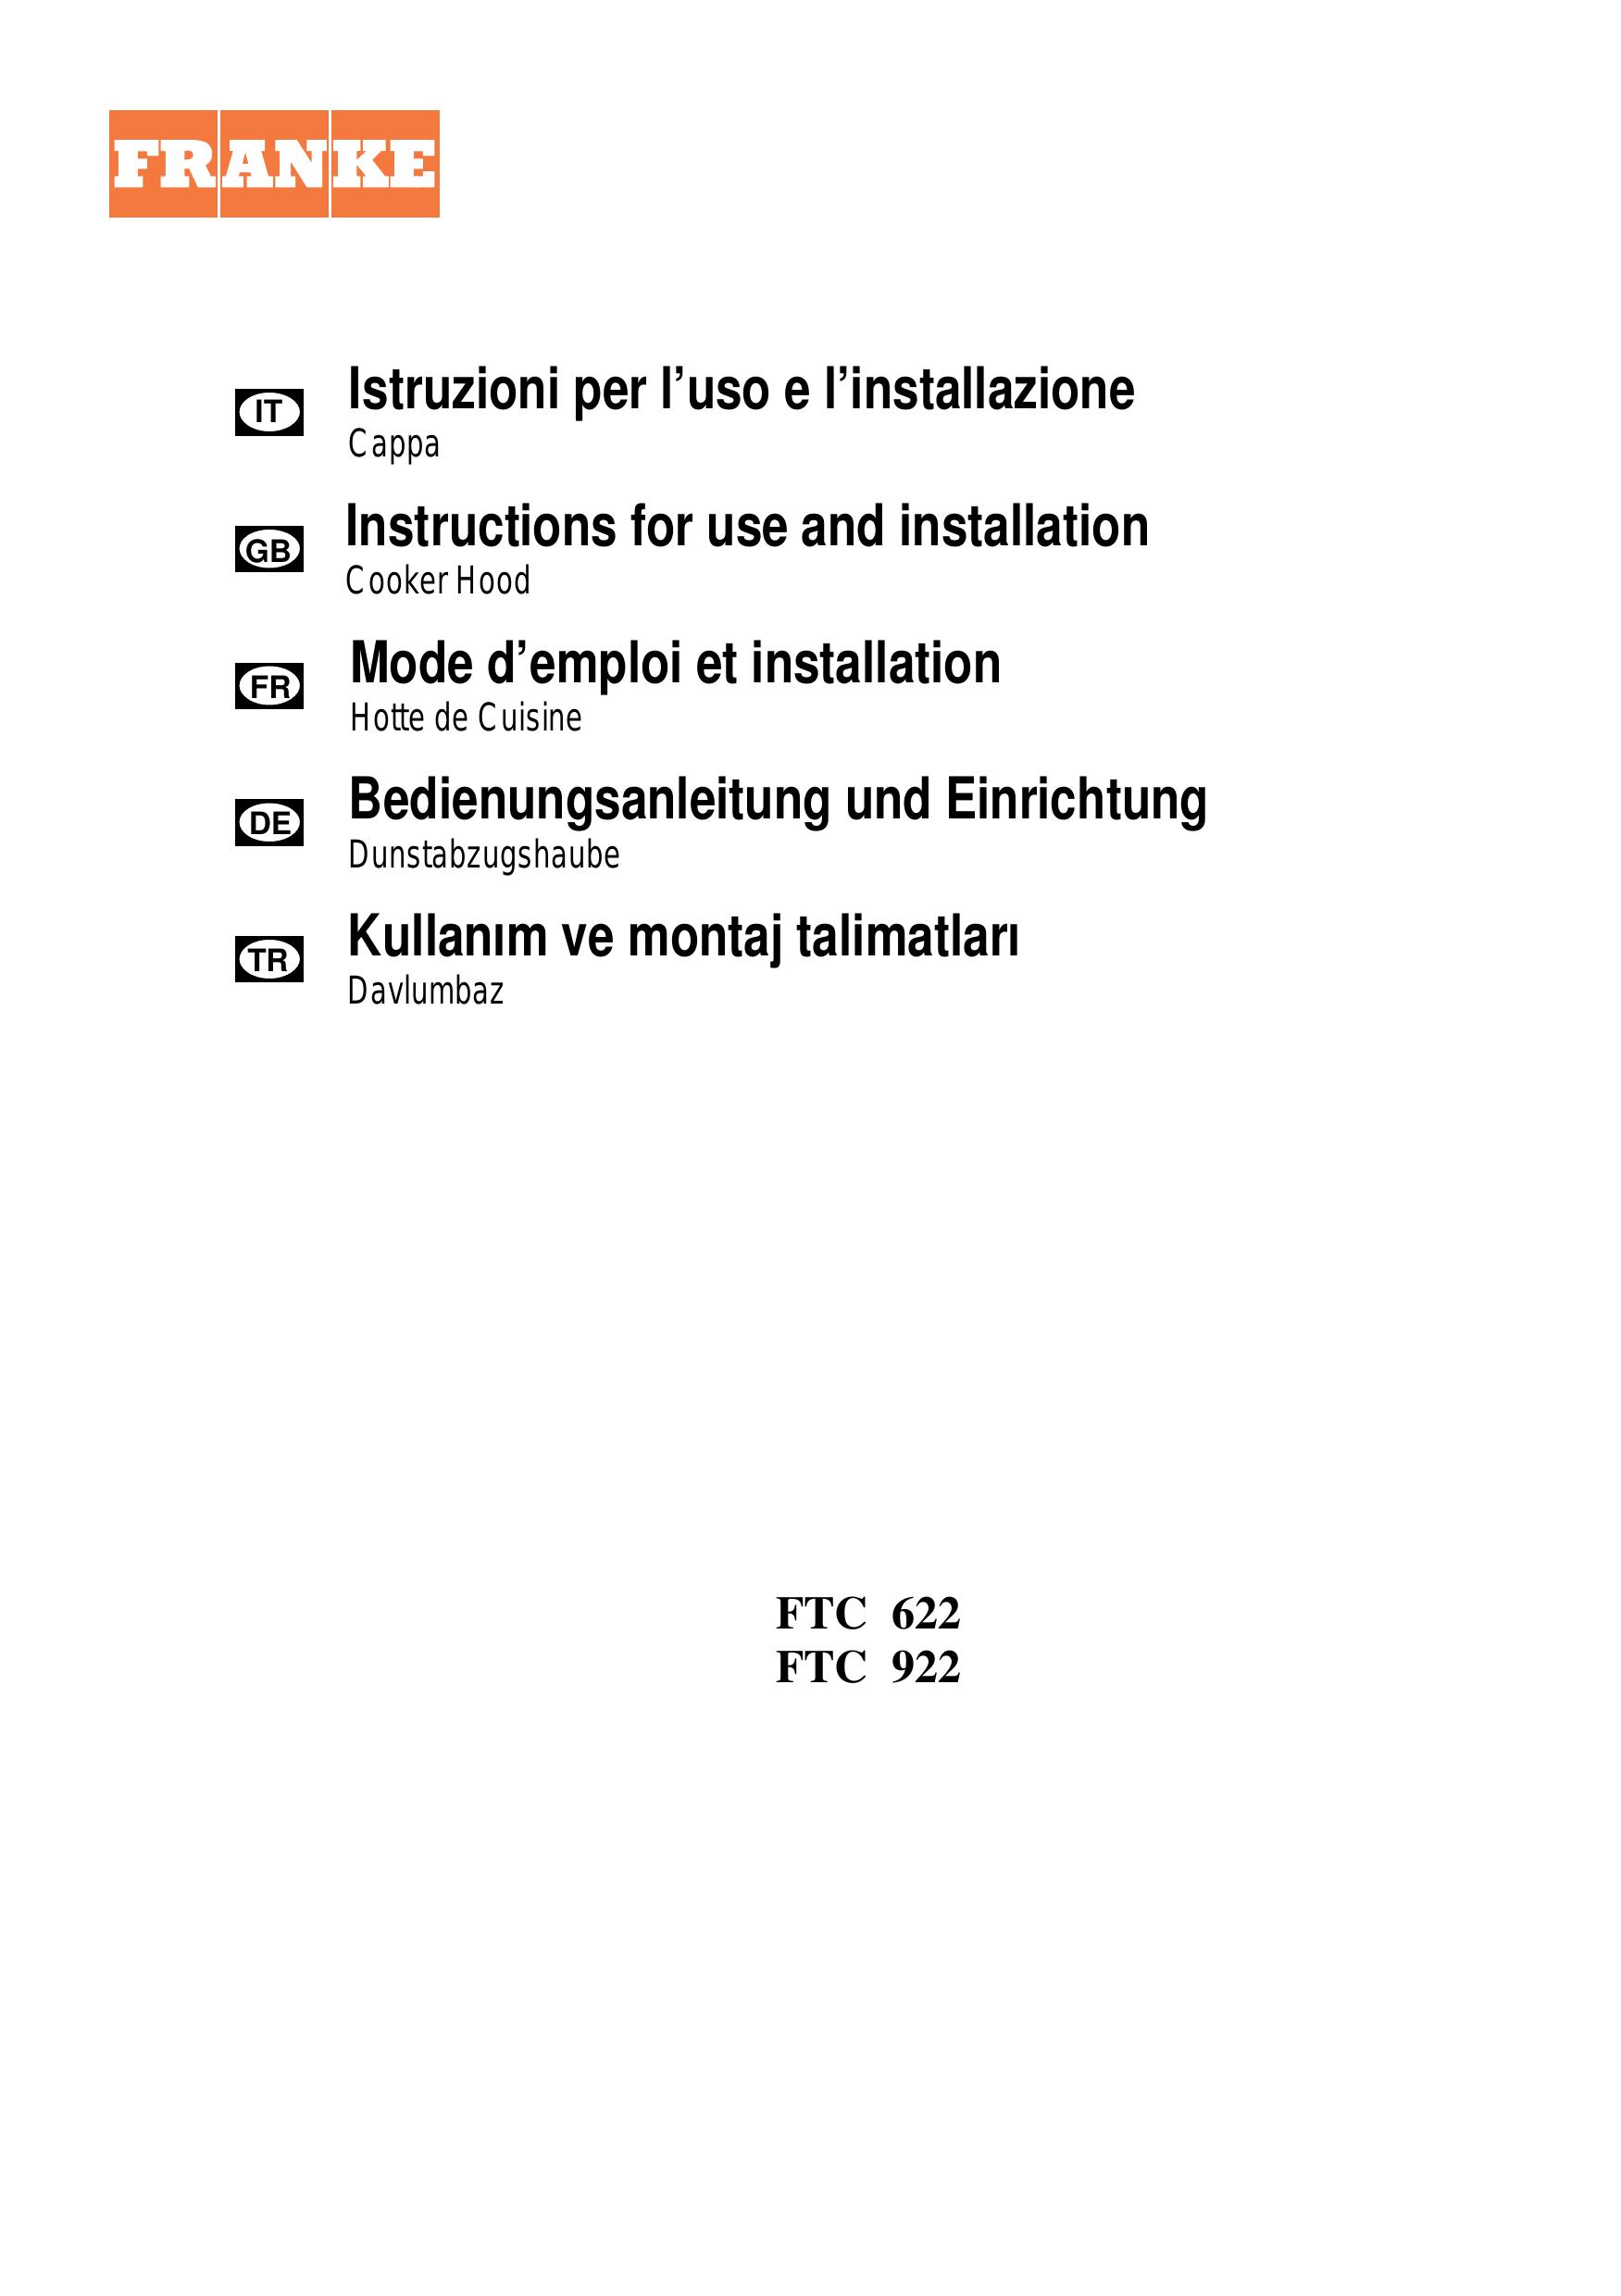 Franke Consumer Products FTC 922 Ventilation Hood User Manual